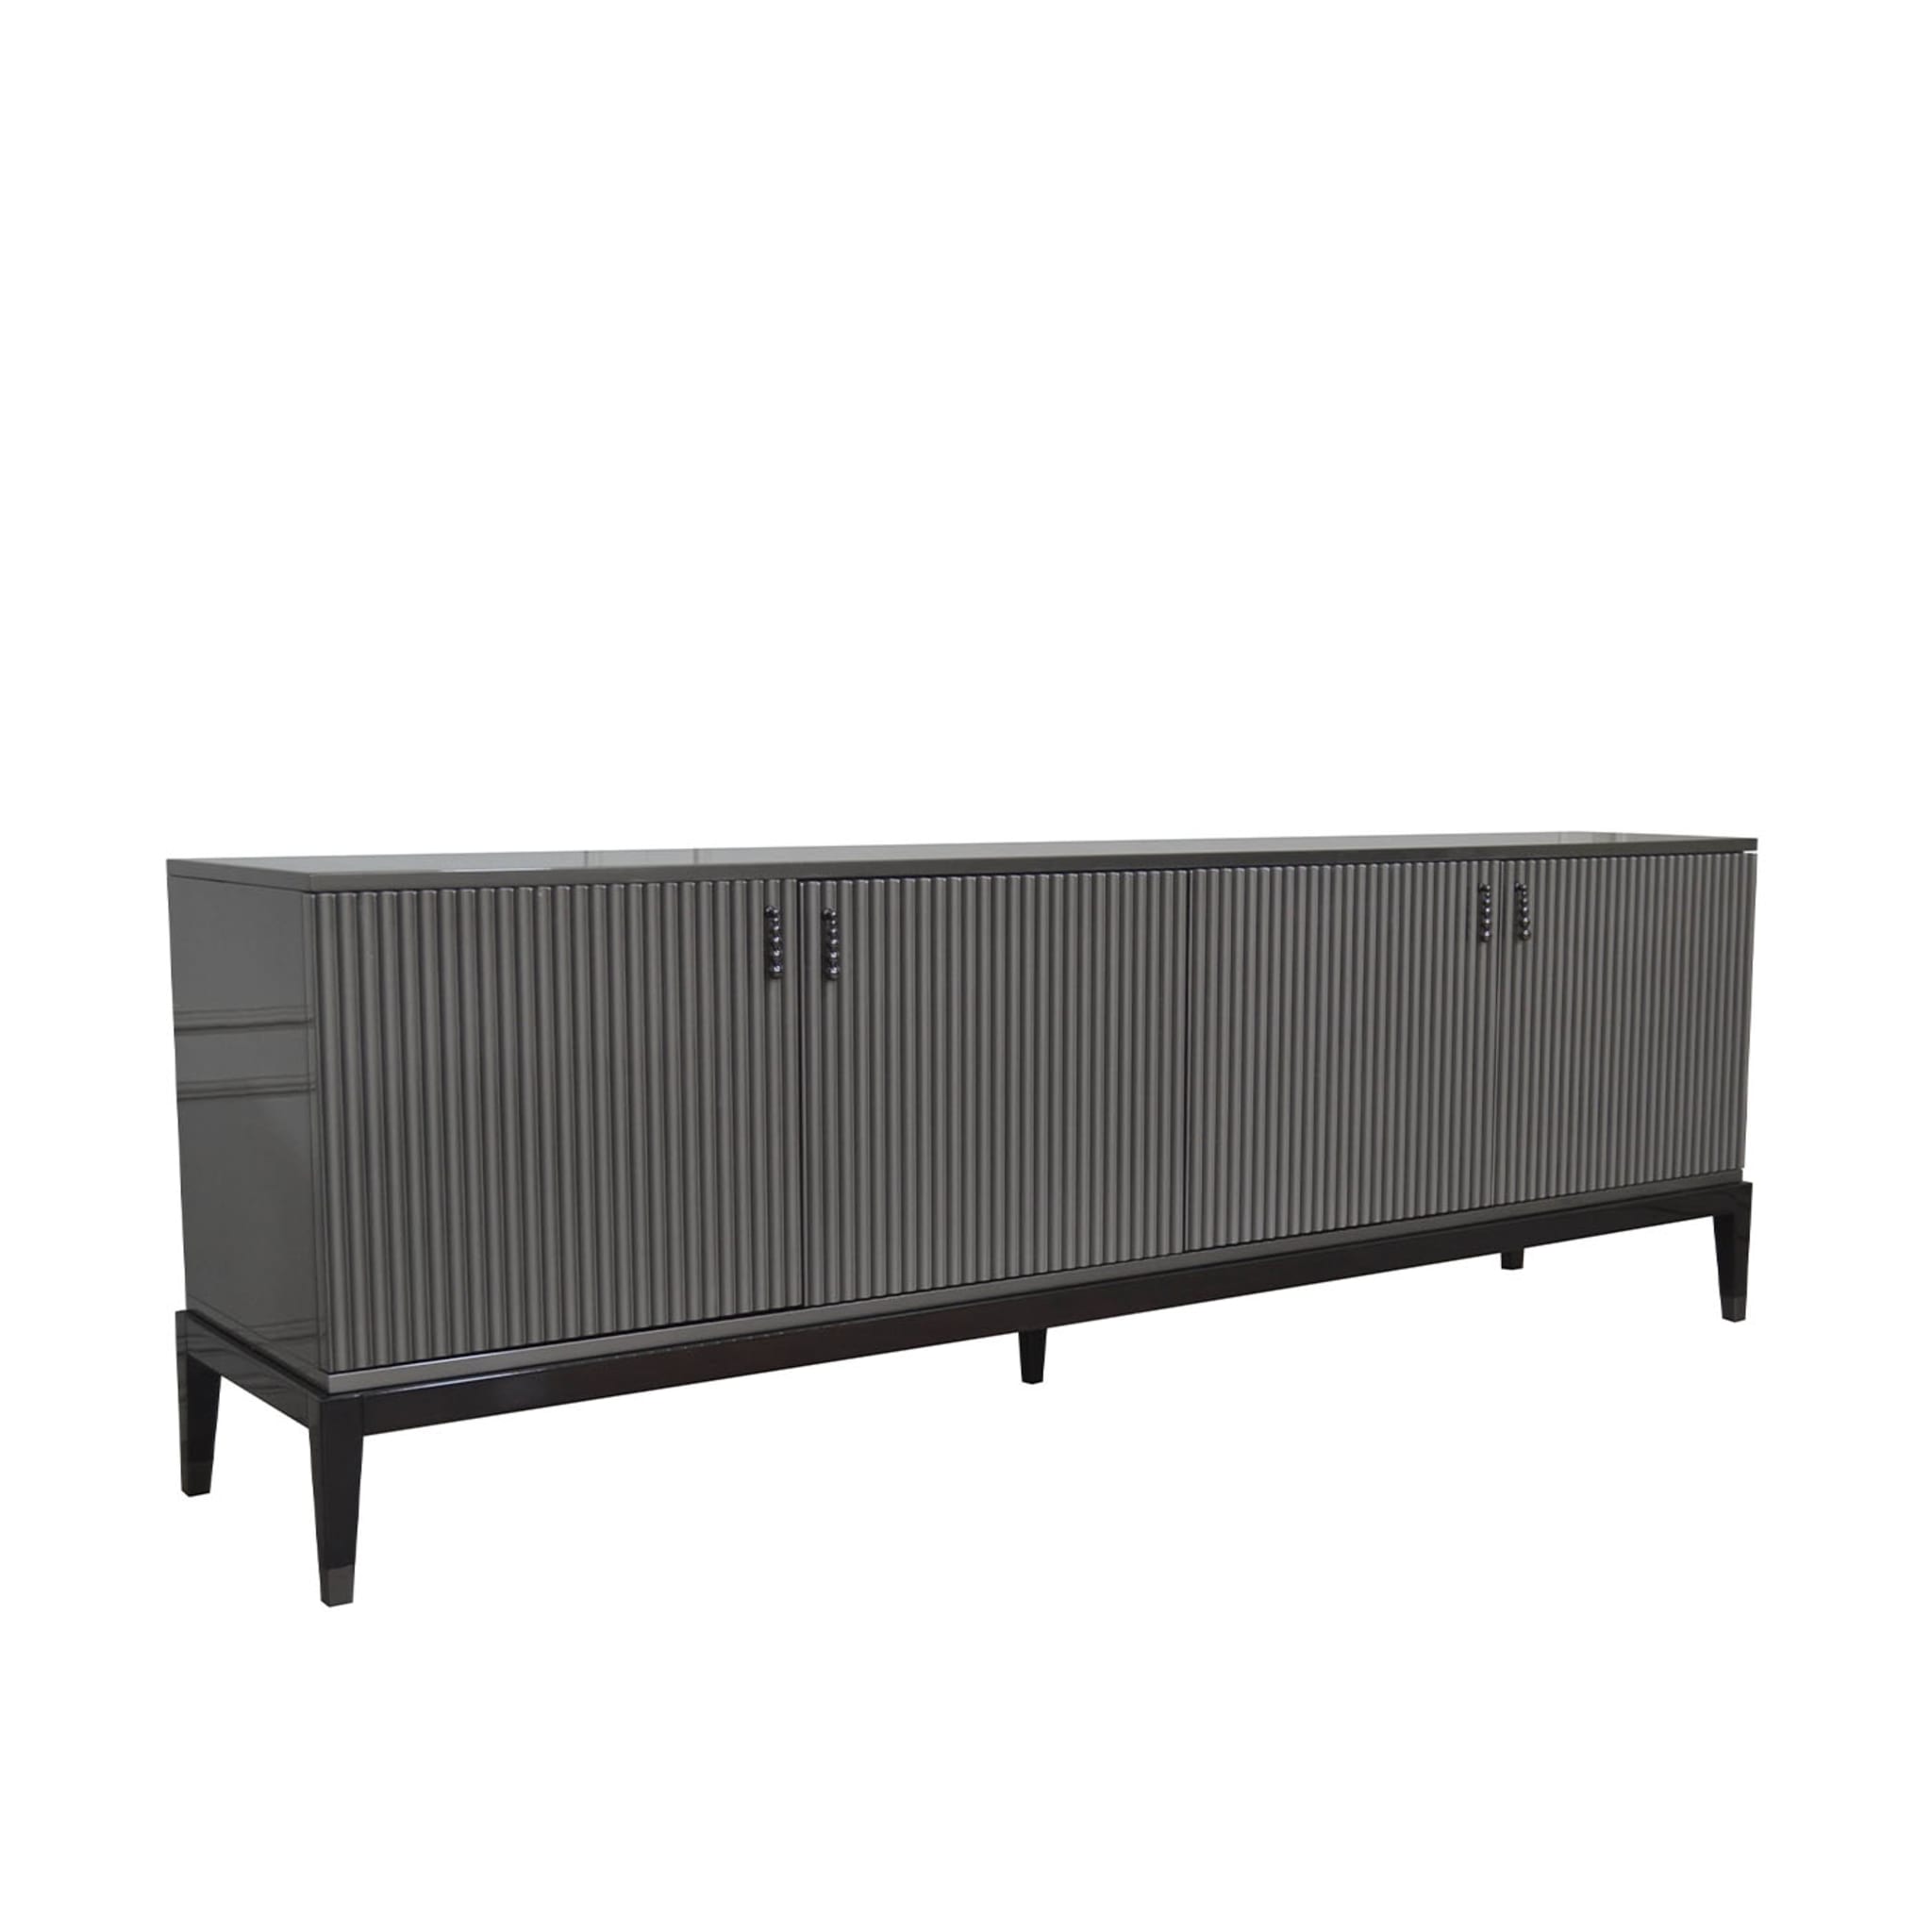 Italian Sideboard in Glossy Gray Lacquered with Four Doors - Alternative view 1